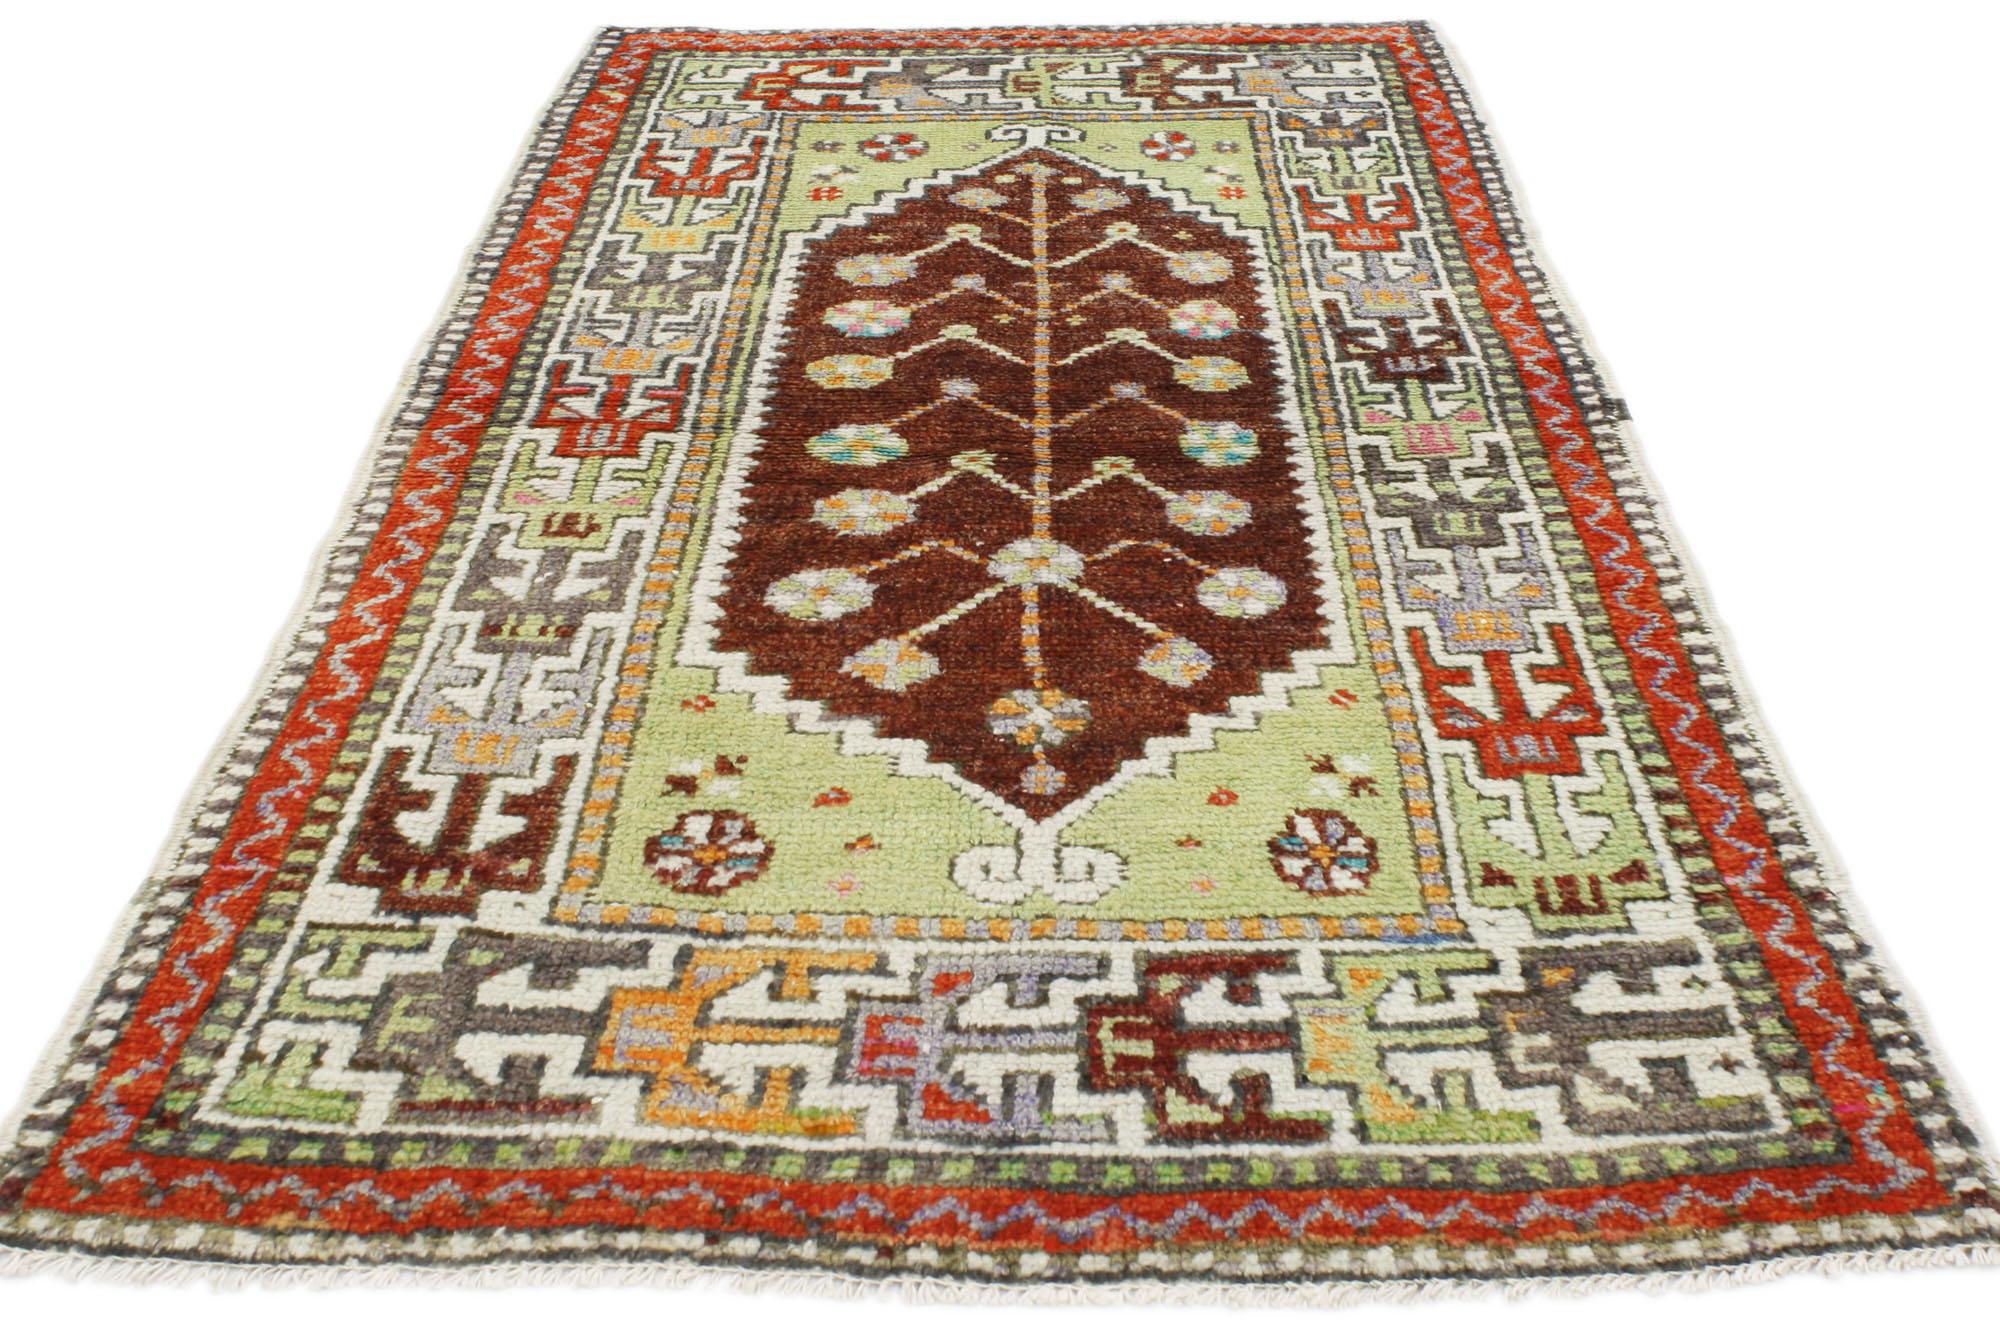 Vintage Turkish Oushak Rug, Colorfully Curated Meets Whimsical Boho In Good Condition For Sale In Dallas, TX